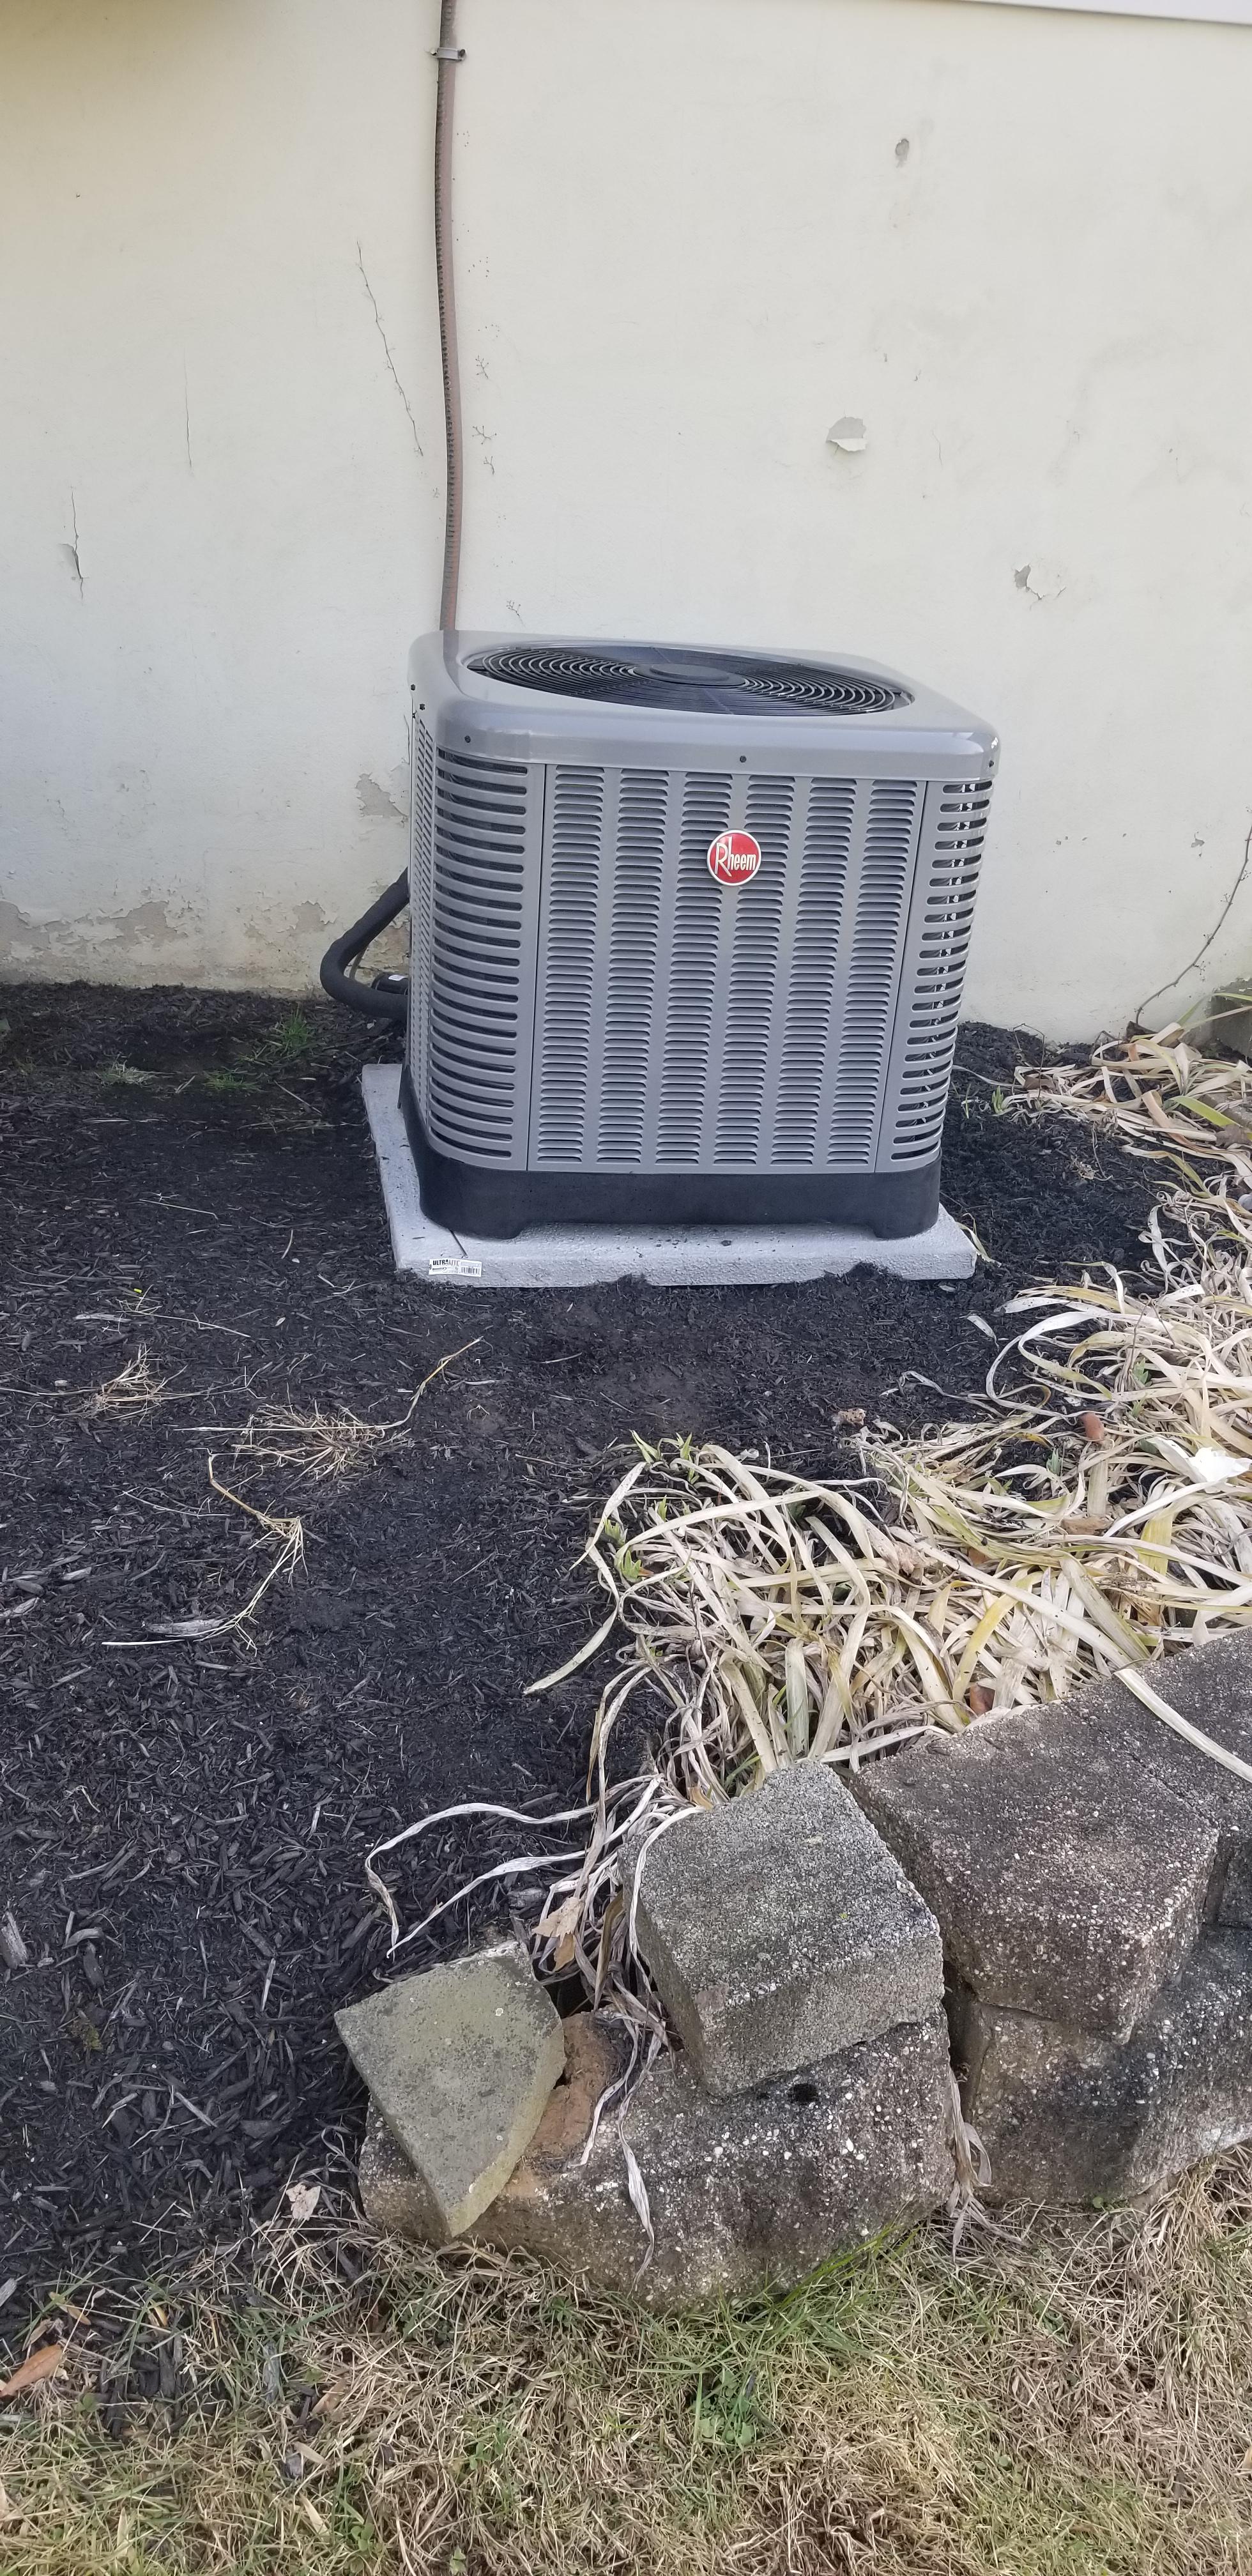 Affordable Air Heating & Cooling Photo